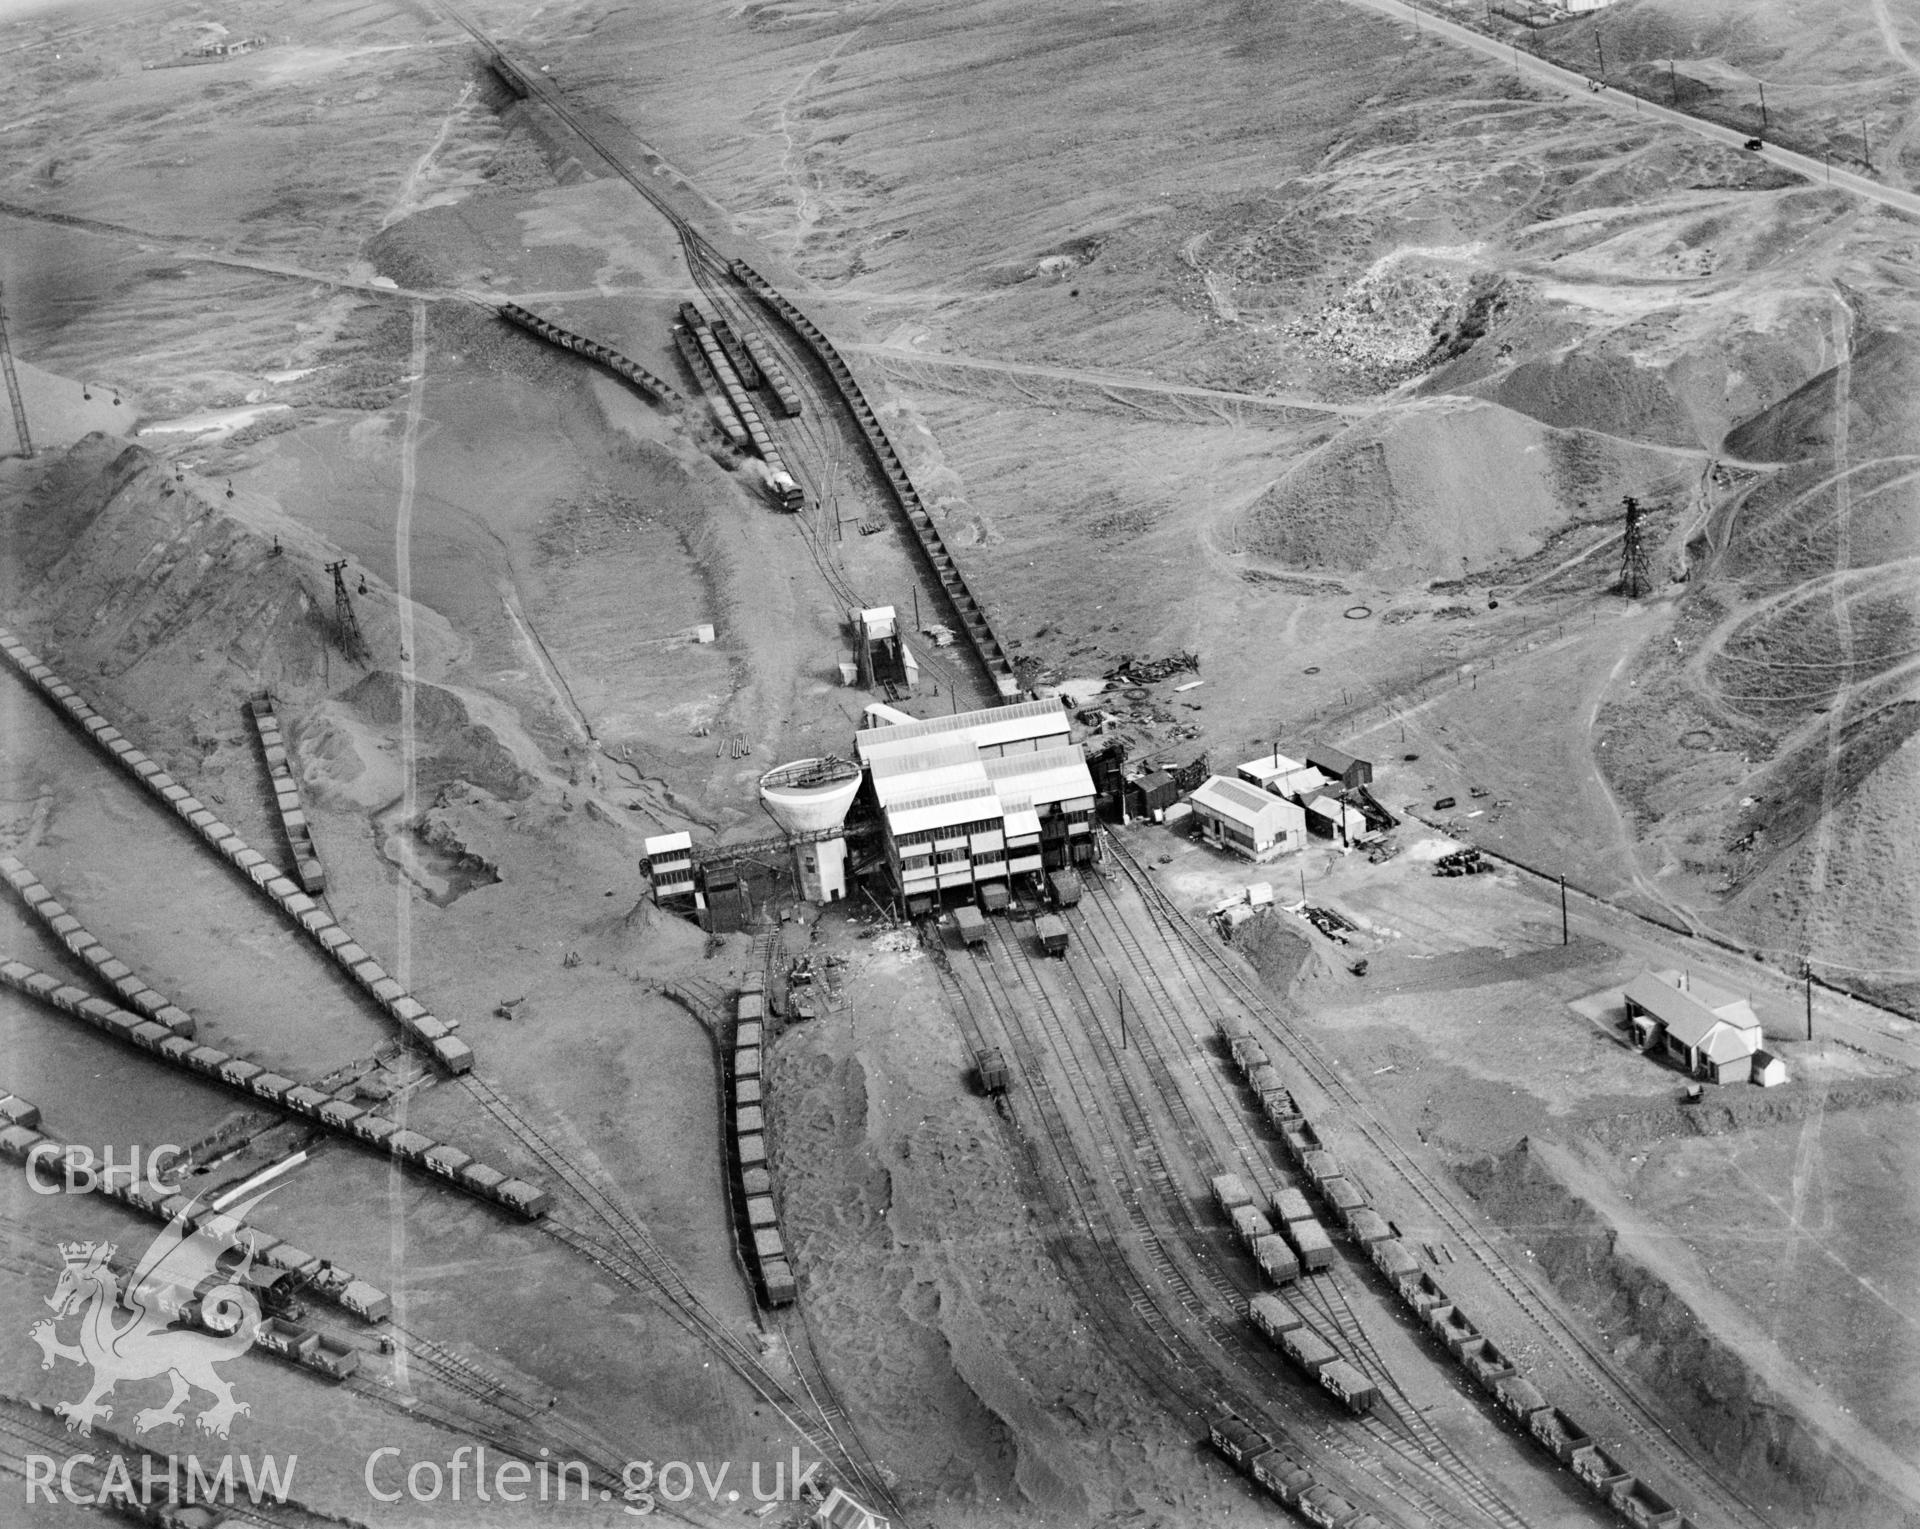 View of Onllwyn coal washery, processing and distribution centre, commissioned by Evans & Bevan, Neath. Oblique aerial photograph, 5?x4? BW glass plate.